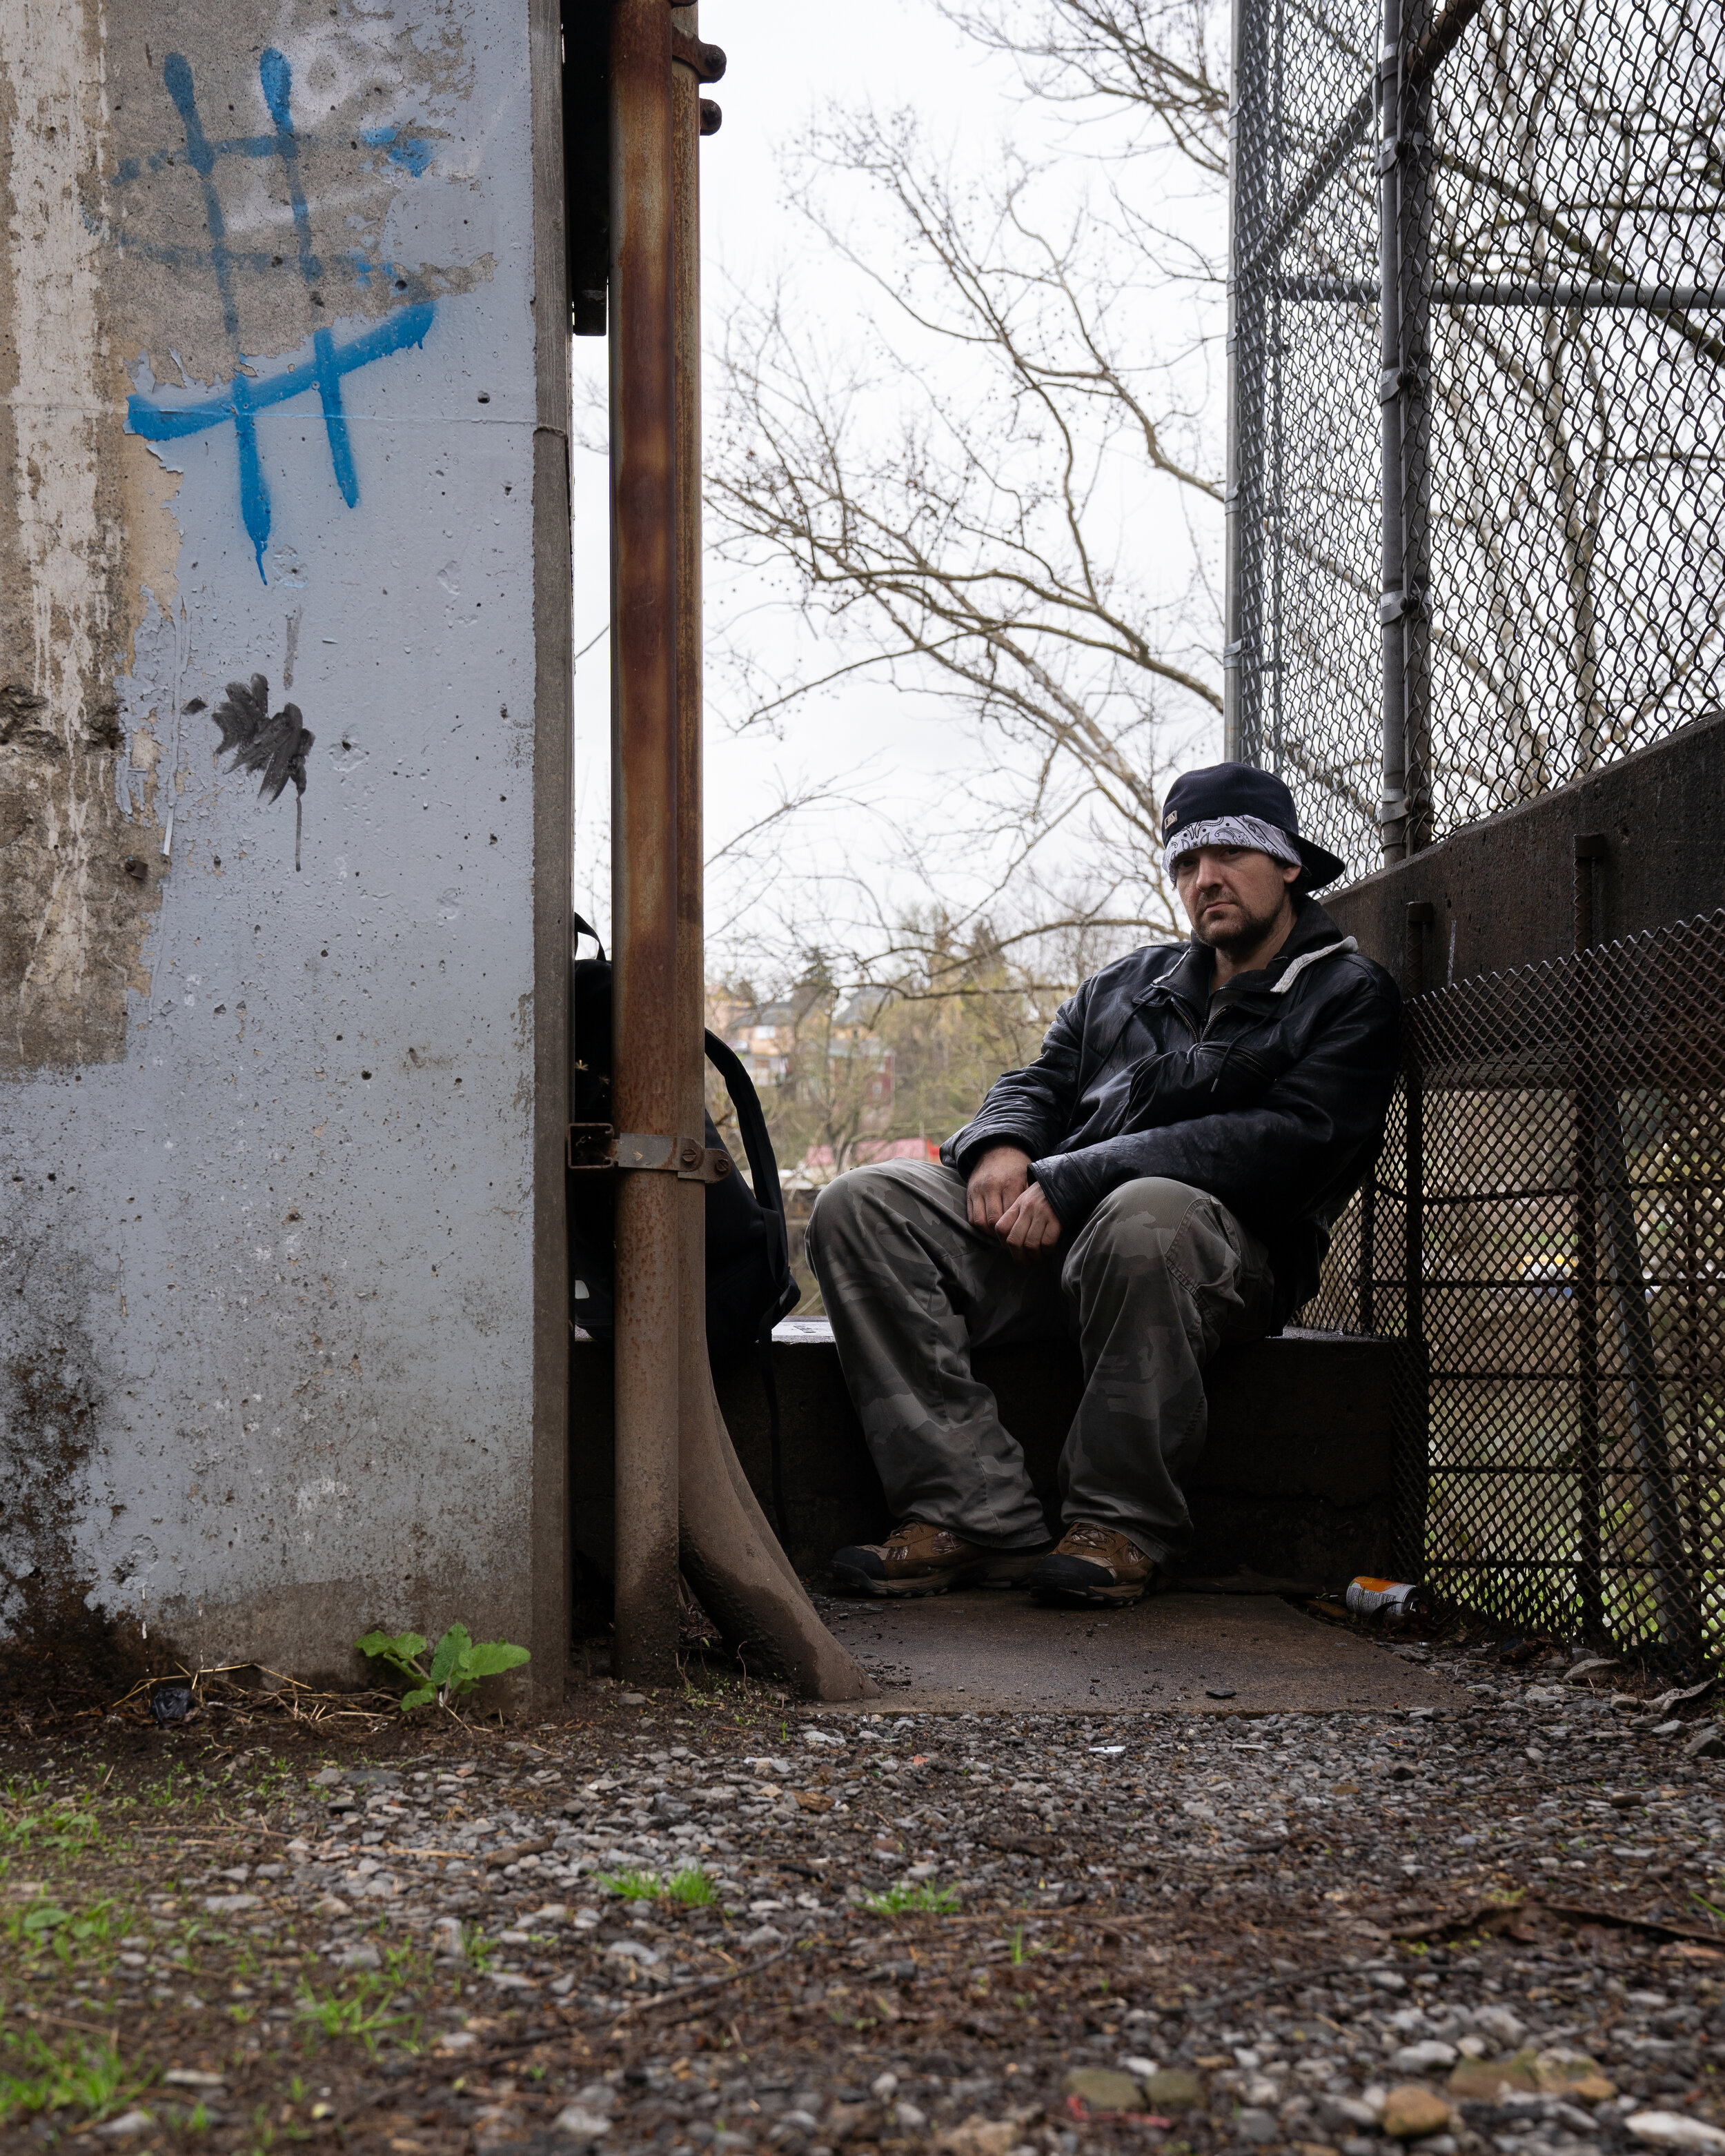  “Doesn’t feel different to me at all. I’ve been isolated for two years, walked all the way here from Nebraska. Some people are nice, some people are a**holes. I don’t have a phone or email, but you could find me on Facebook. My profile picture is st